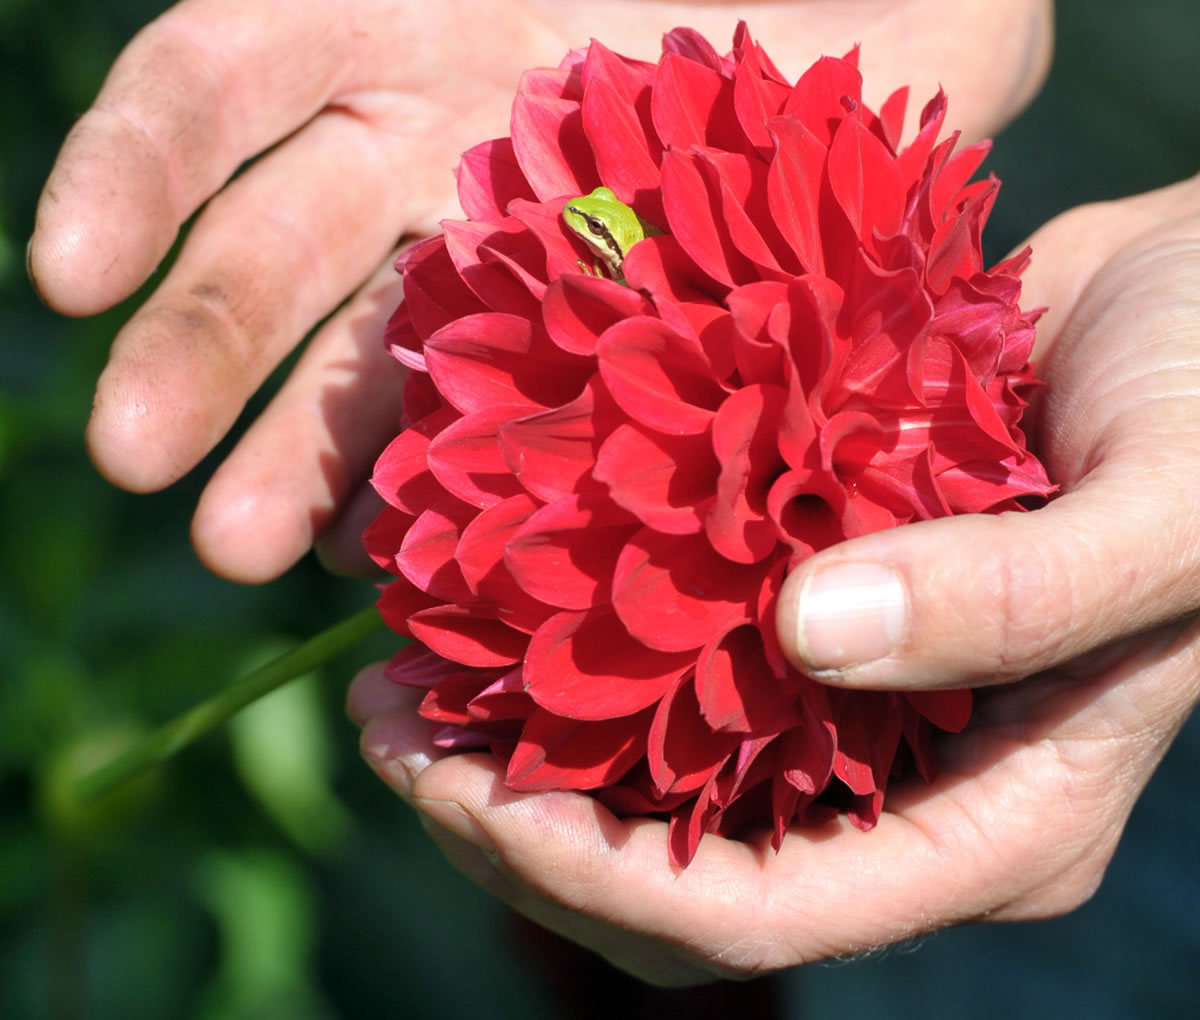 Diane Szukovathy, co-owner of Jello Mold Farm, holds a dahlia 'Ali Oop' with a frog in it, August 30, 2012, at her farm in Mount Vernon, Washington. Szukovathy said she notices more frogs hiding in flowers waiting for insects while the air is calm.